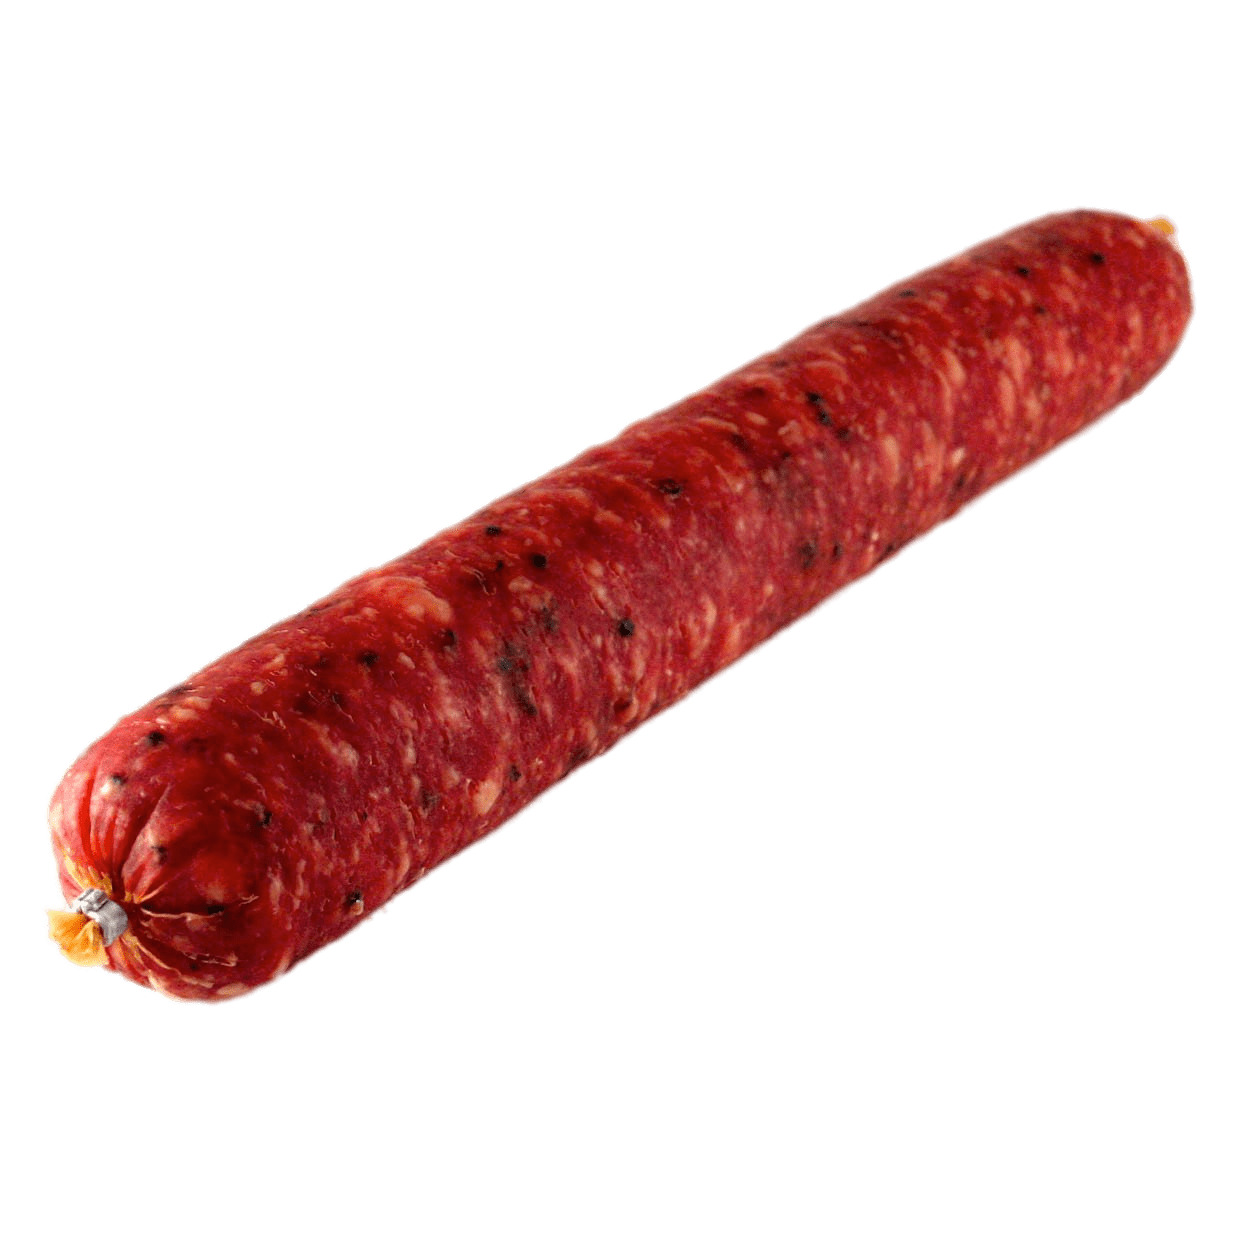 Whole Sweet Salami Roll icons